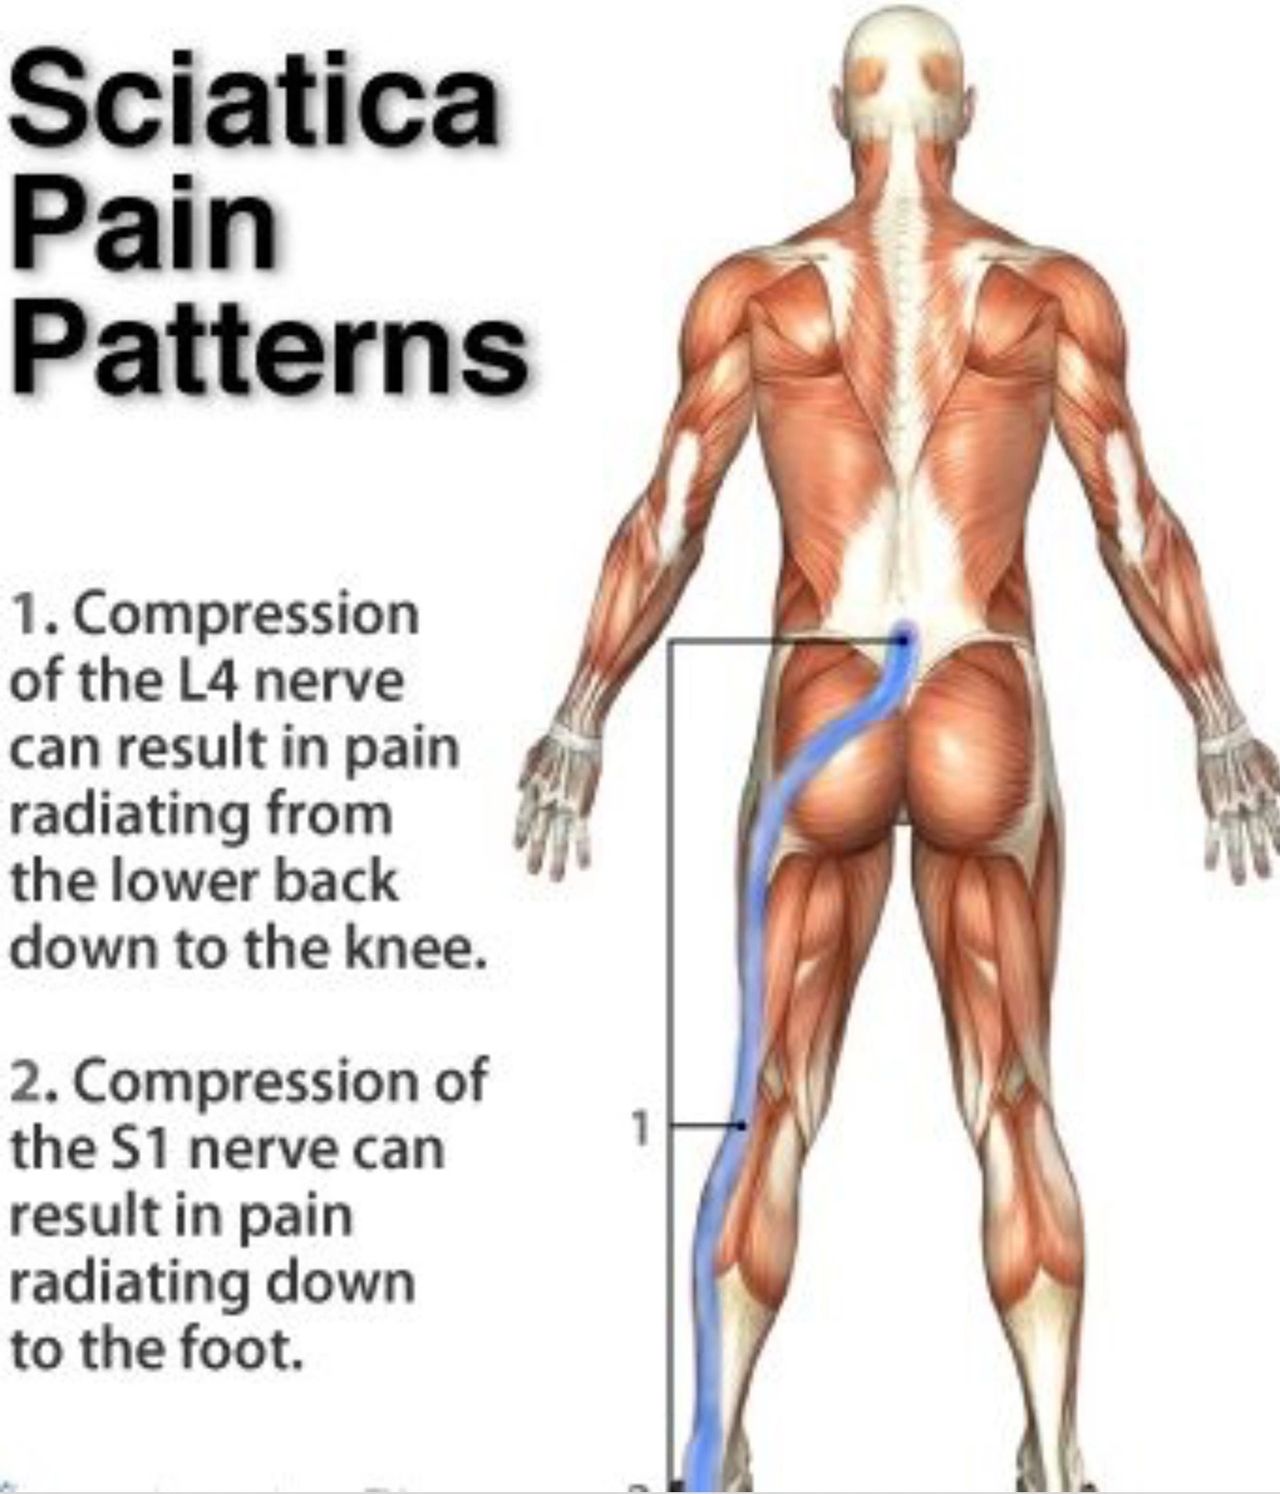 Can Massage Help with Sciatica?